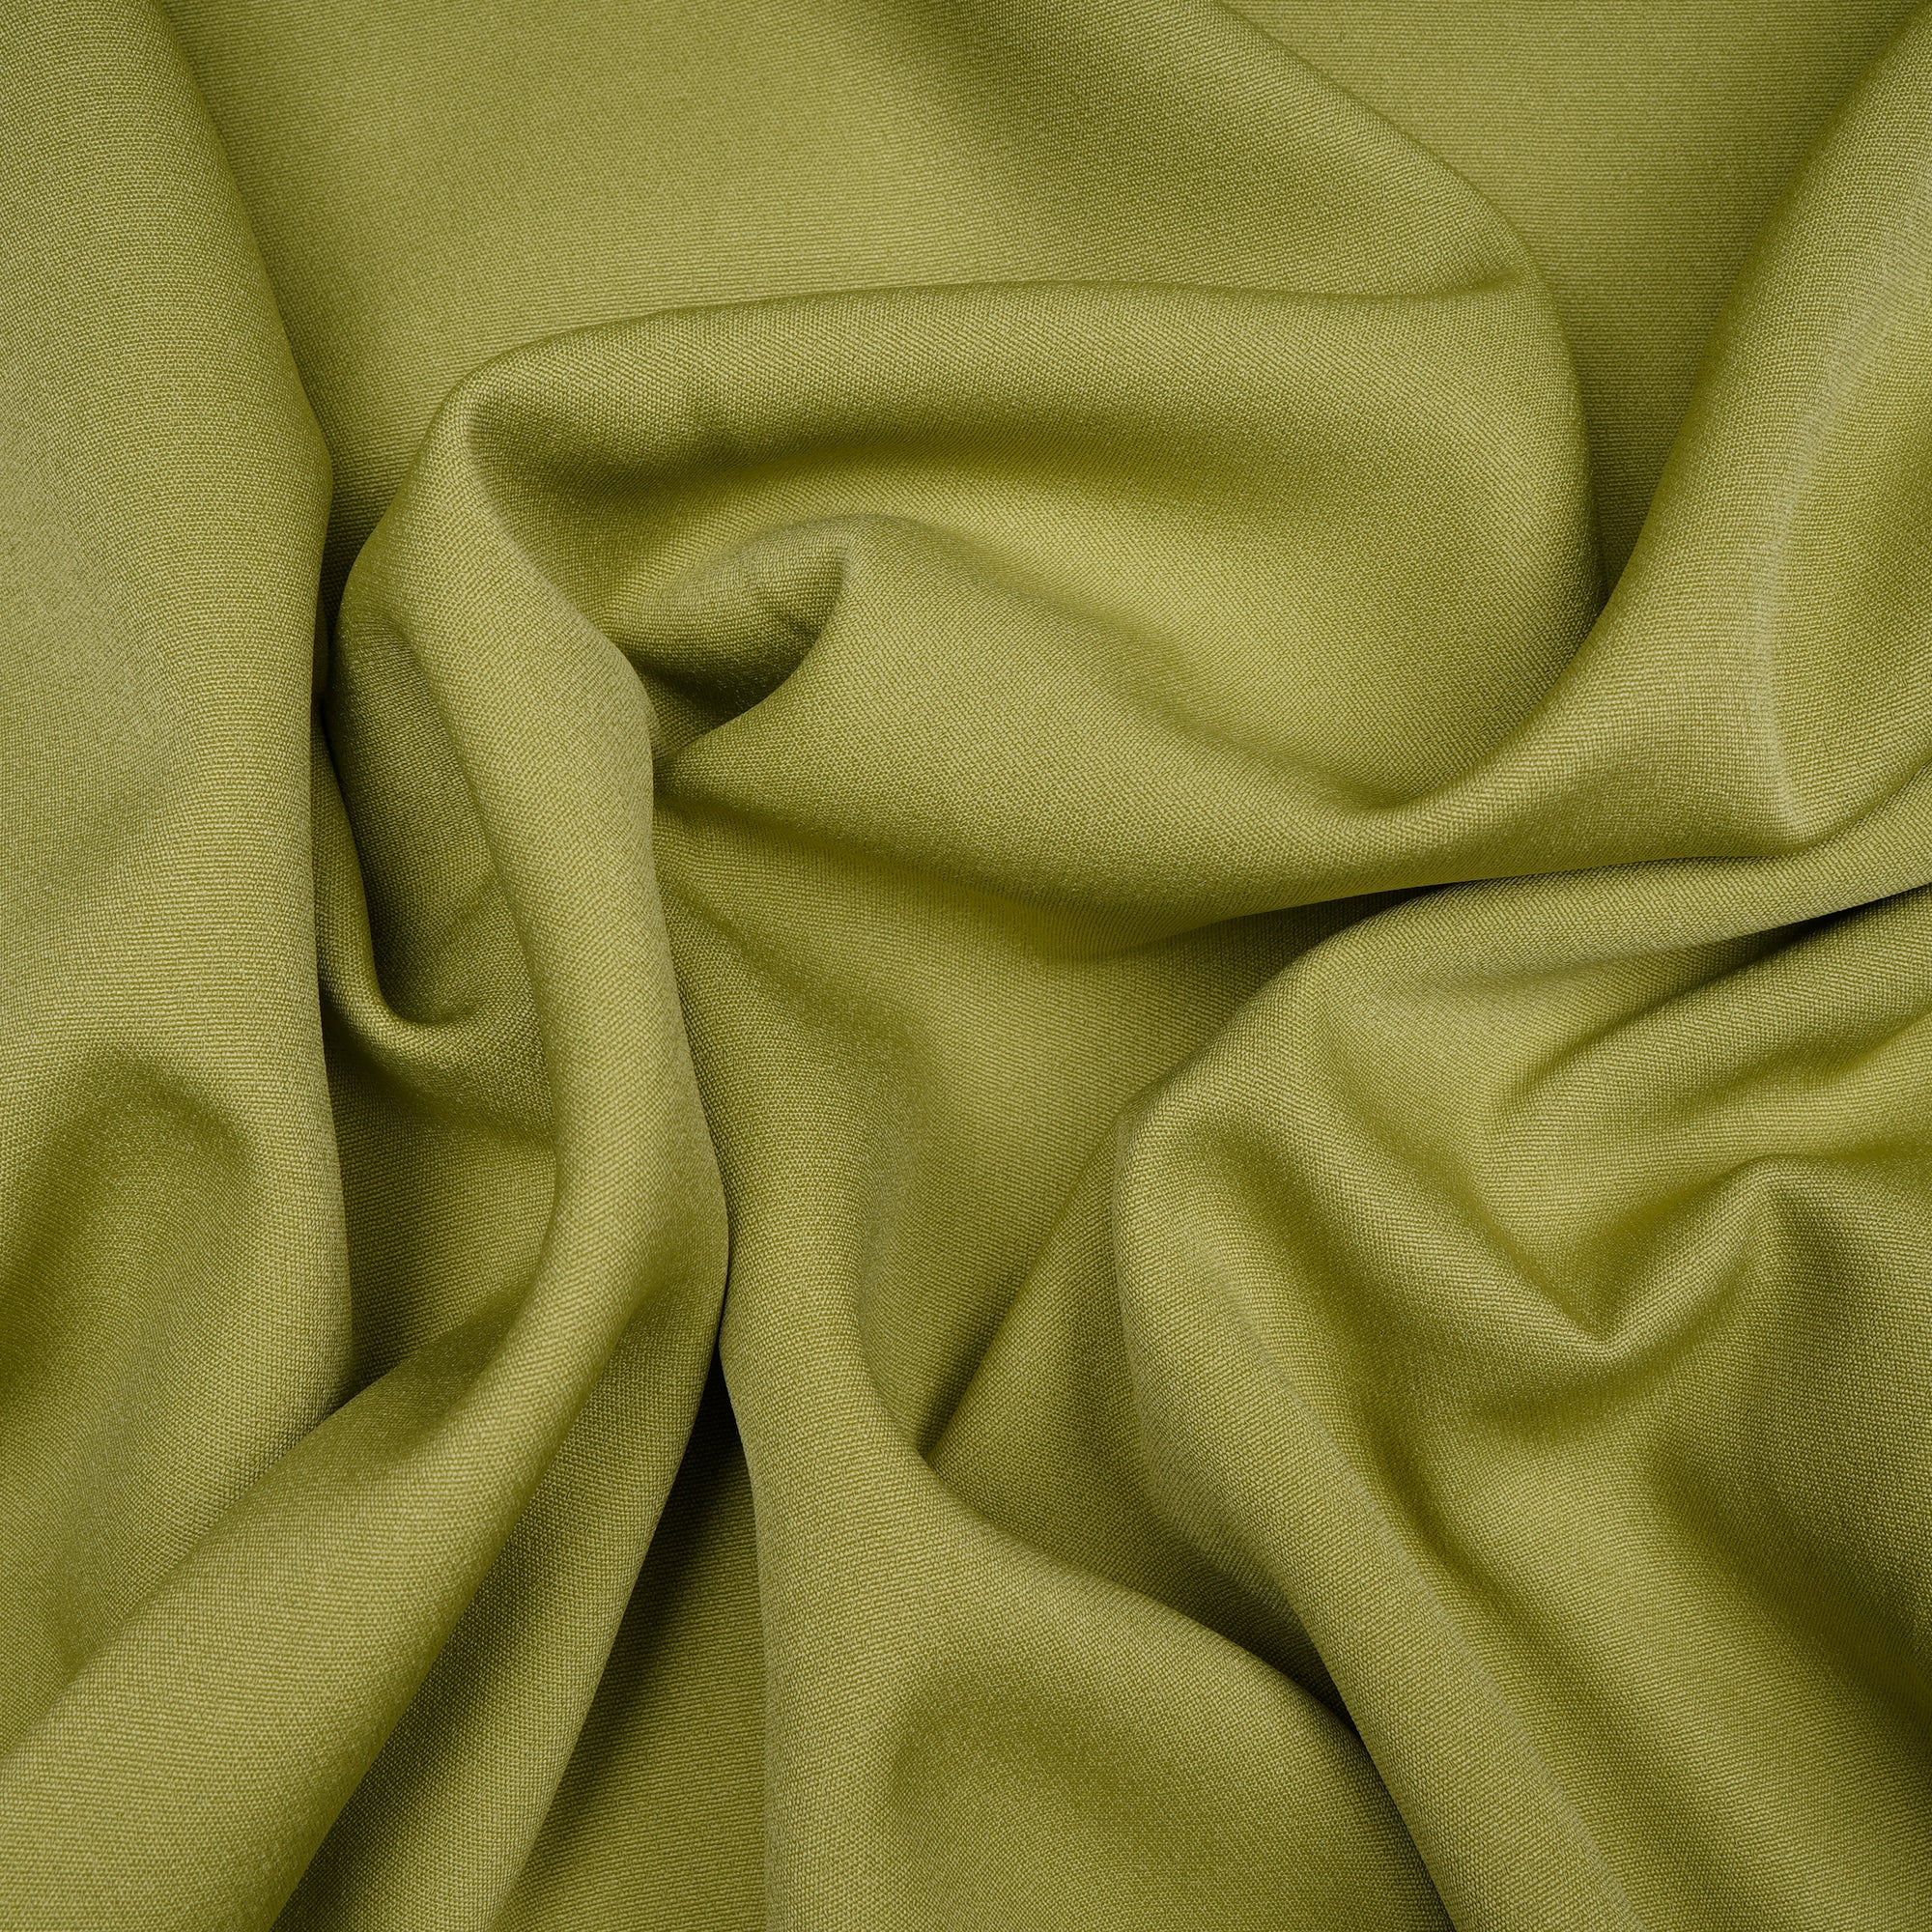 Apple Green Solid Dyed Imported Banana Crepe Fabric (60" Width)